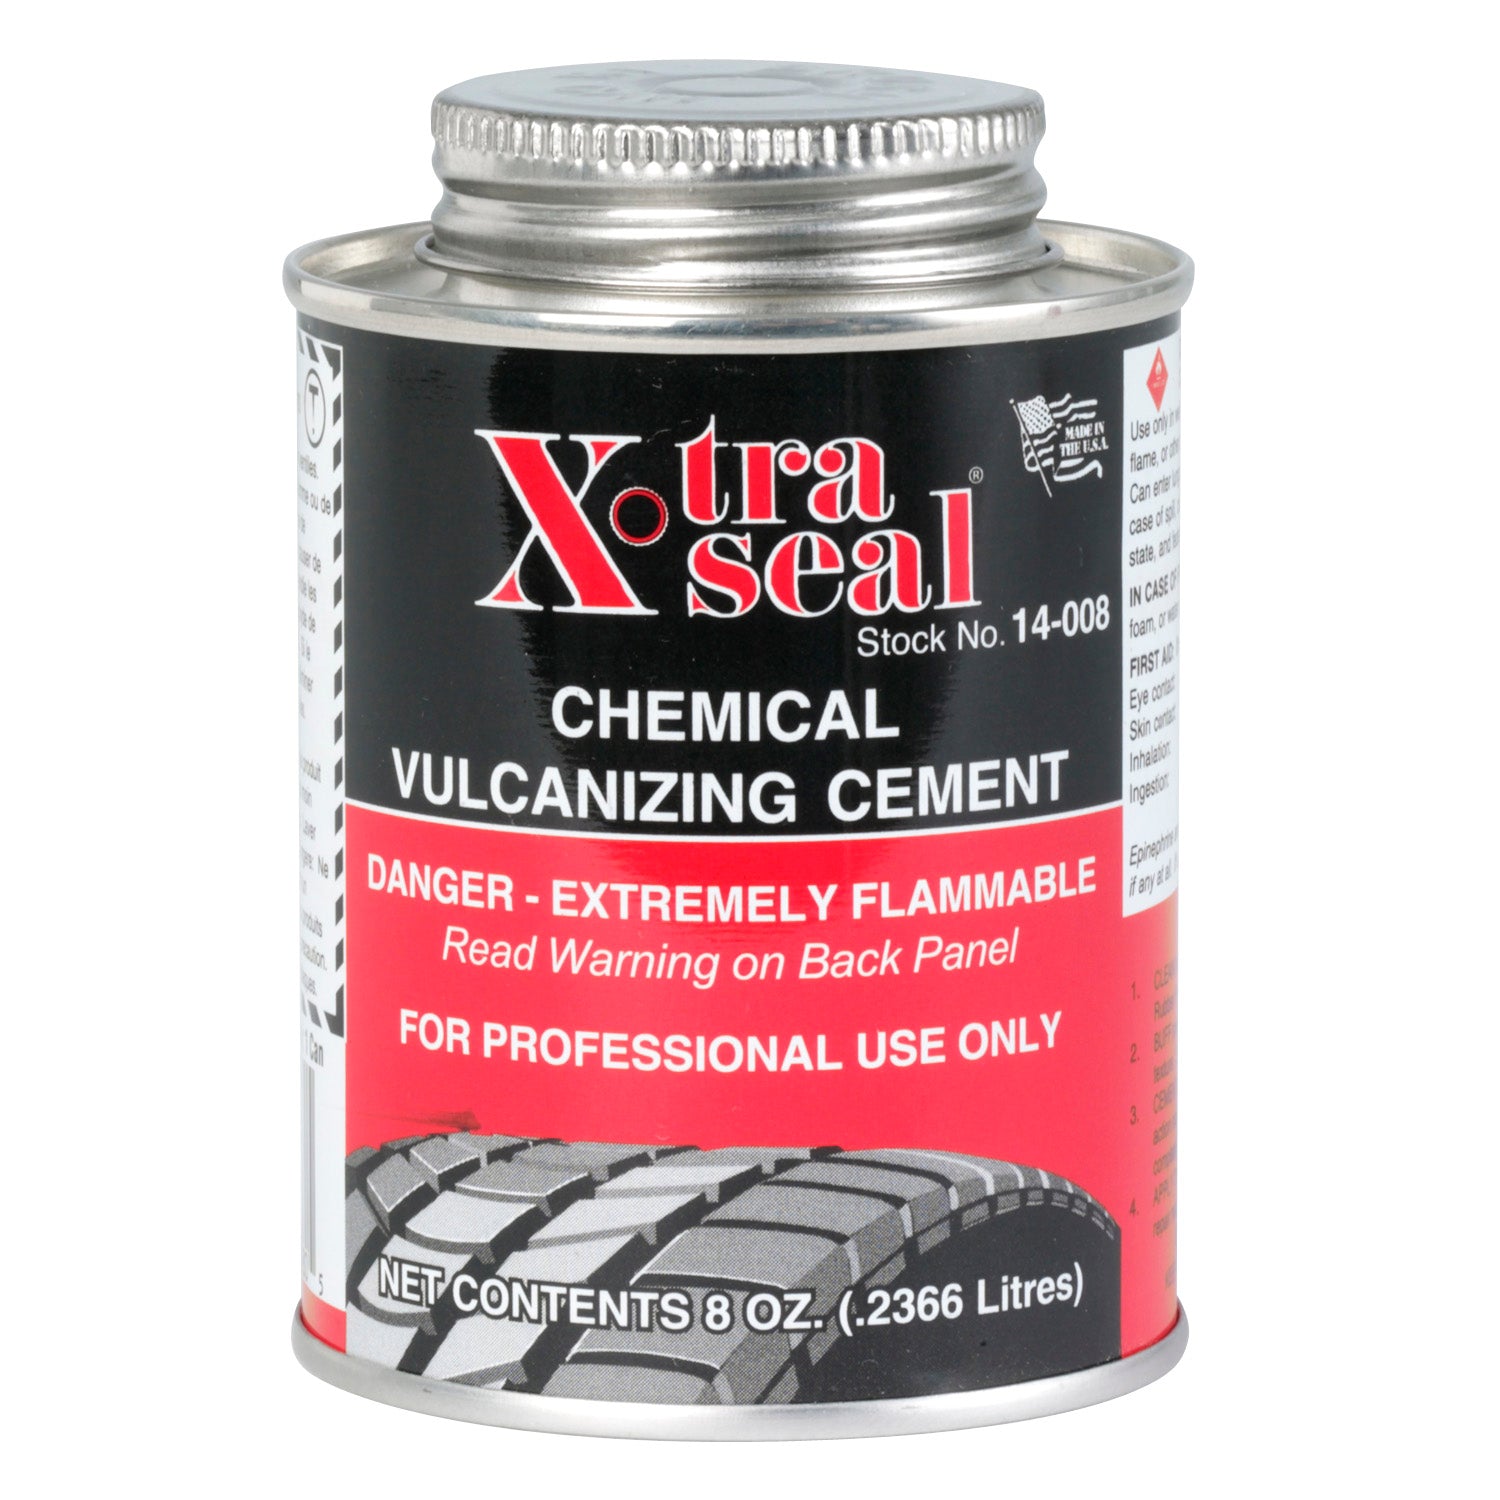 Xtra Seal 8 oz. (236ml) Vulcanizing Cement, Flammable